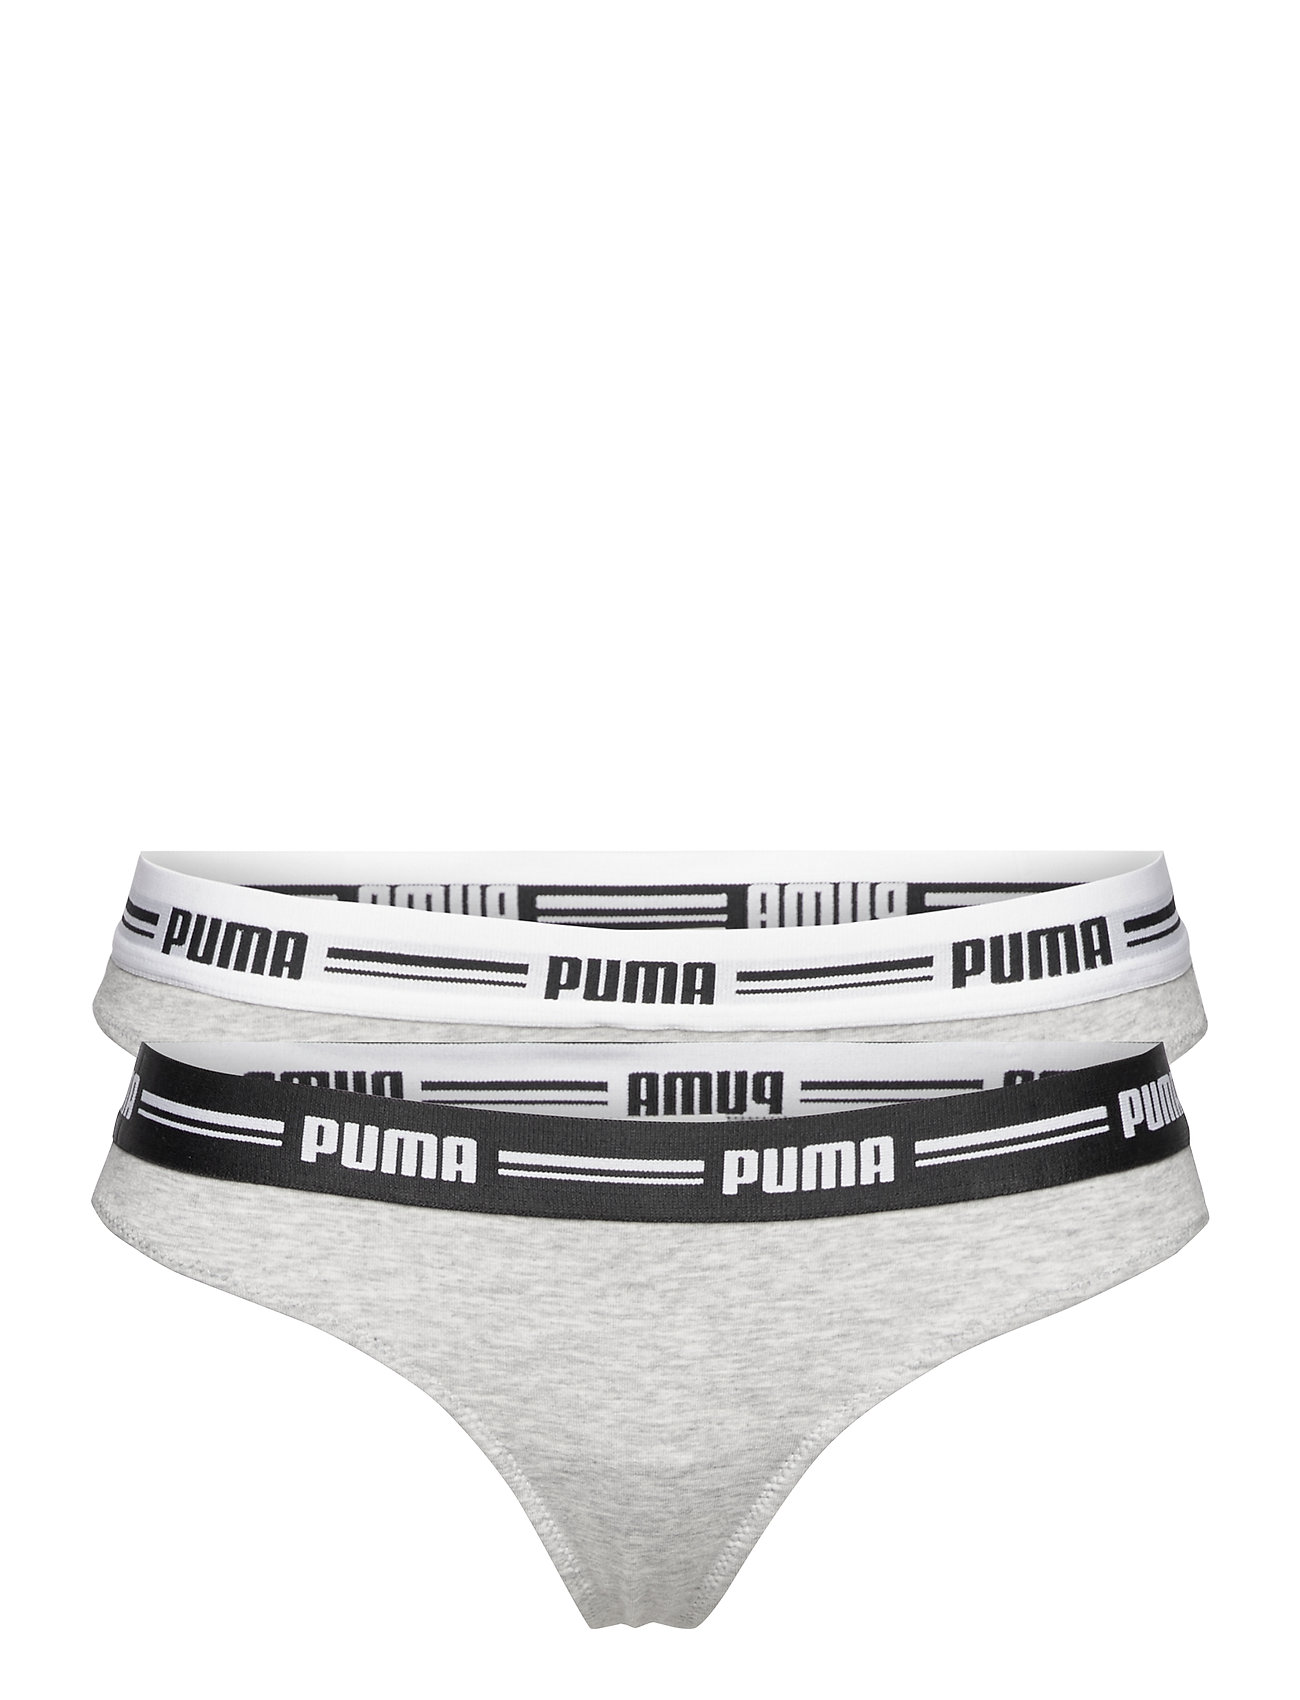 Puma Hipsters 2 Pack 603032001200 women